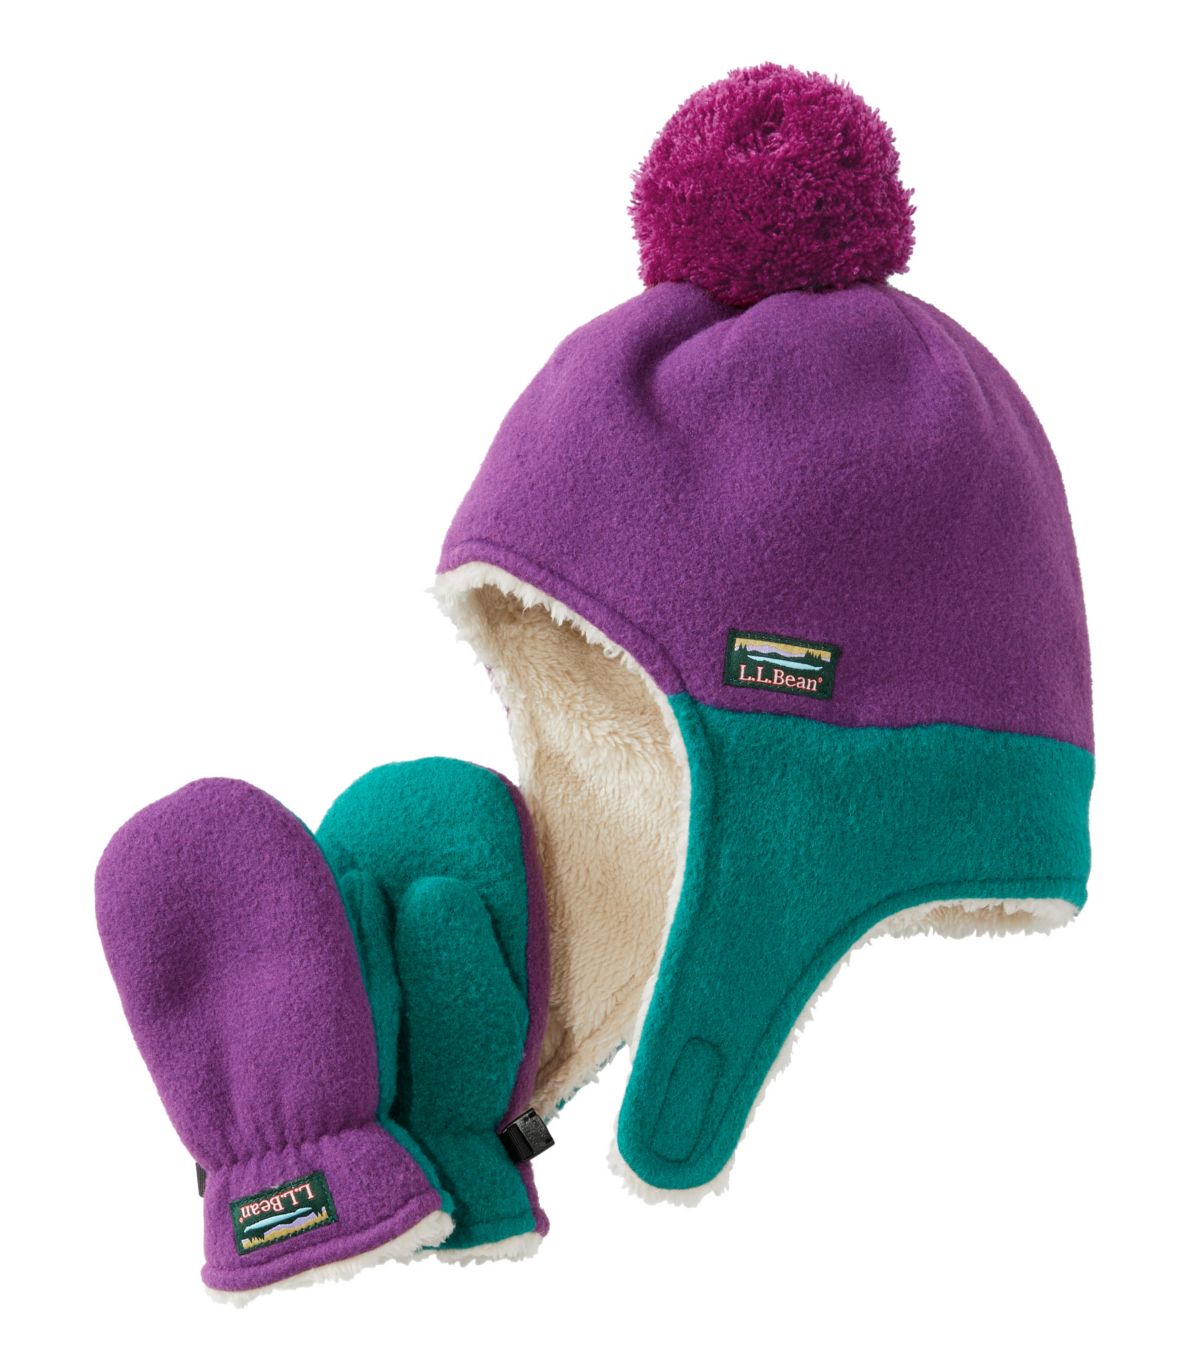 Infants' and Toddlers' Mountain Classic Fleece Hat and Mitten Set